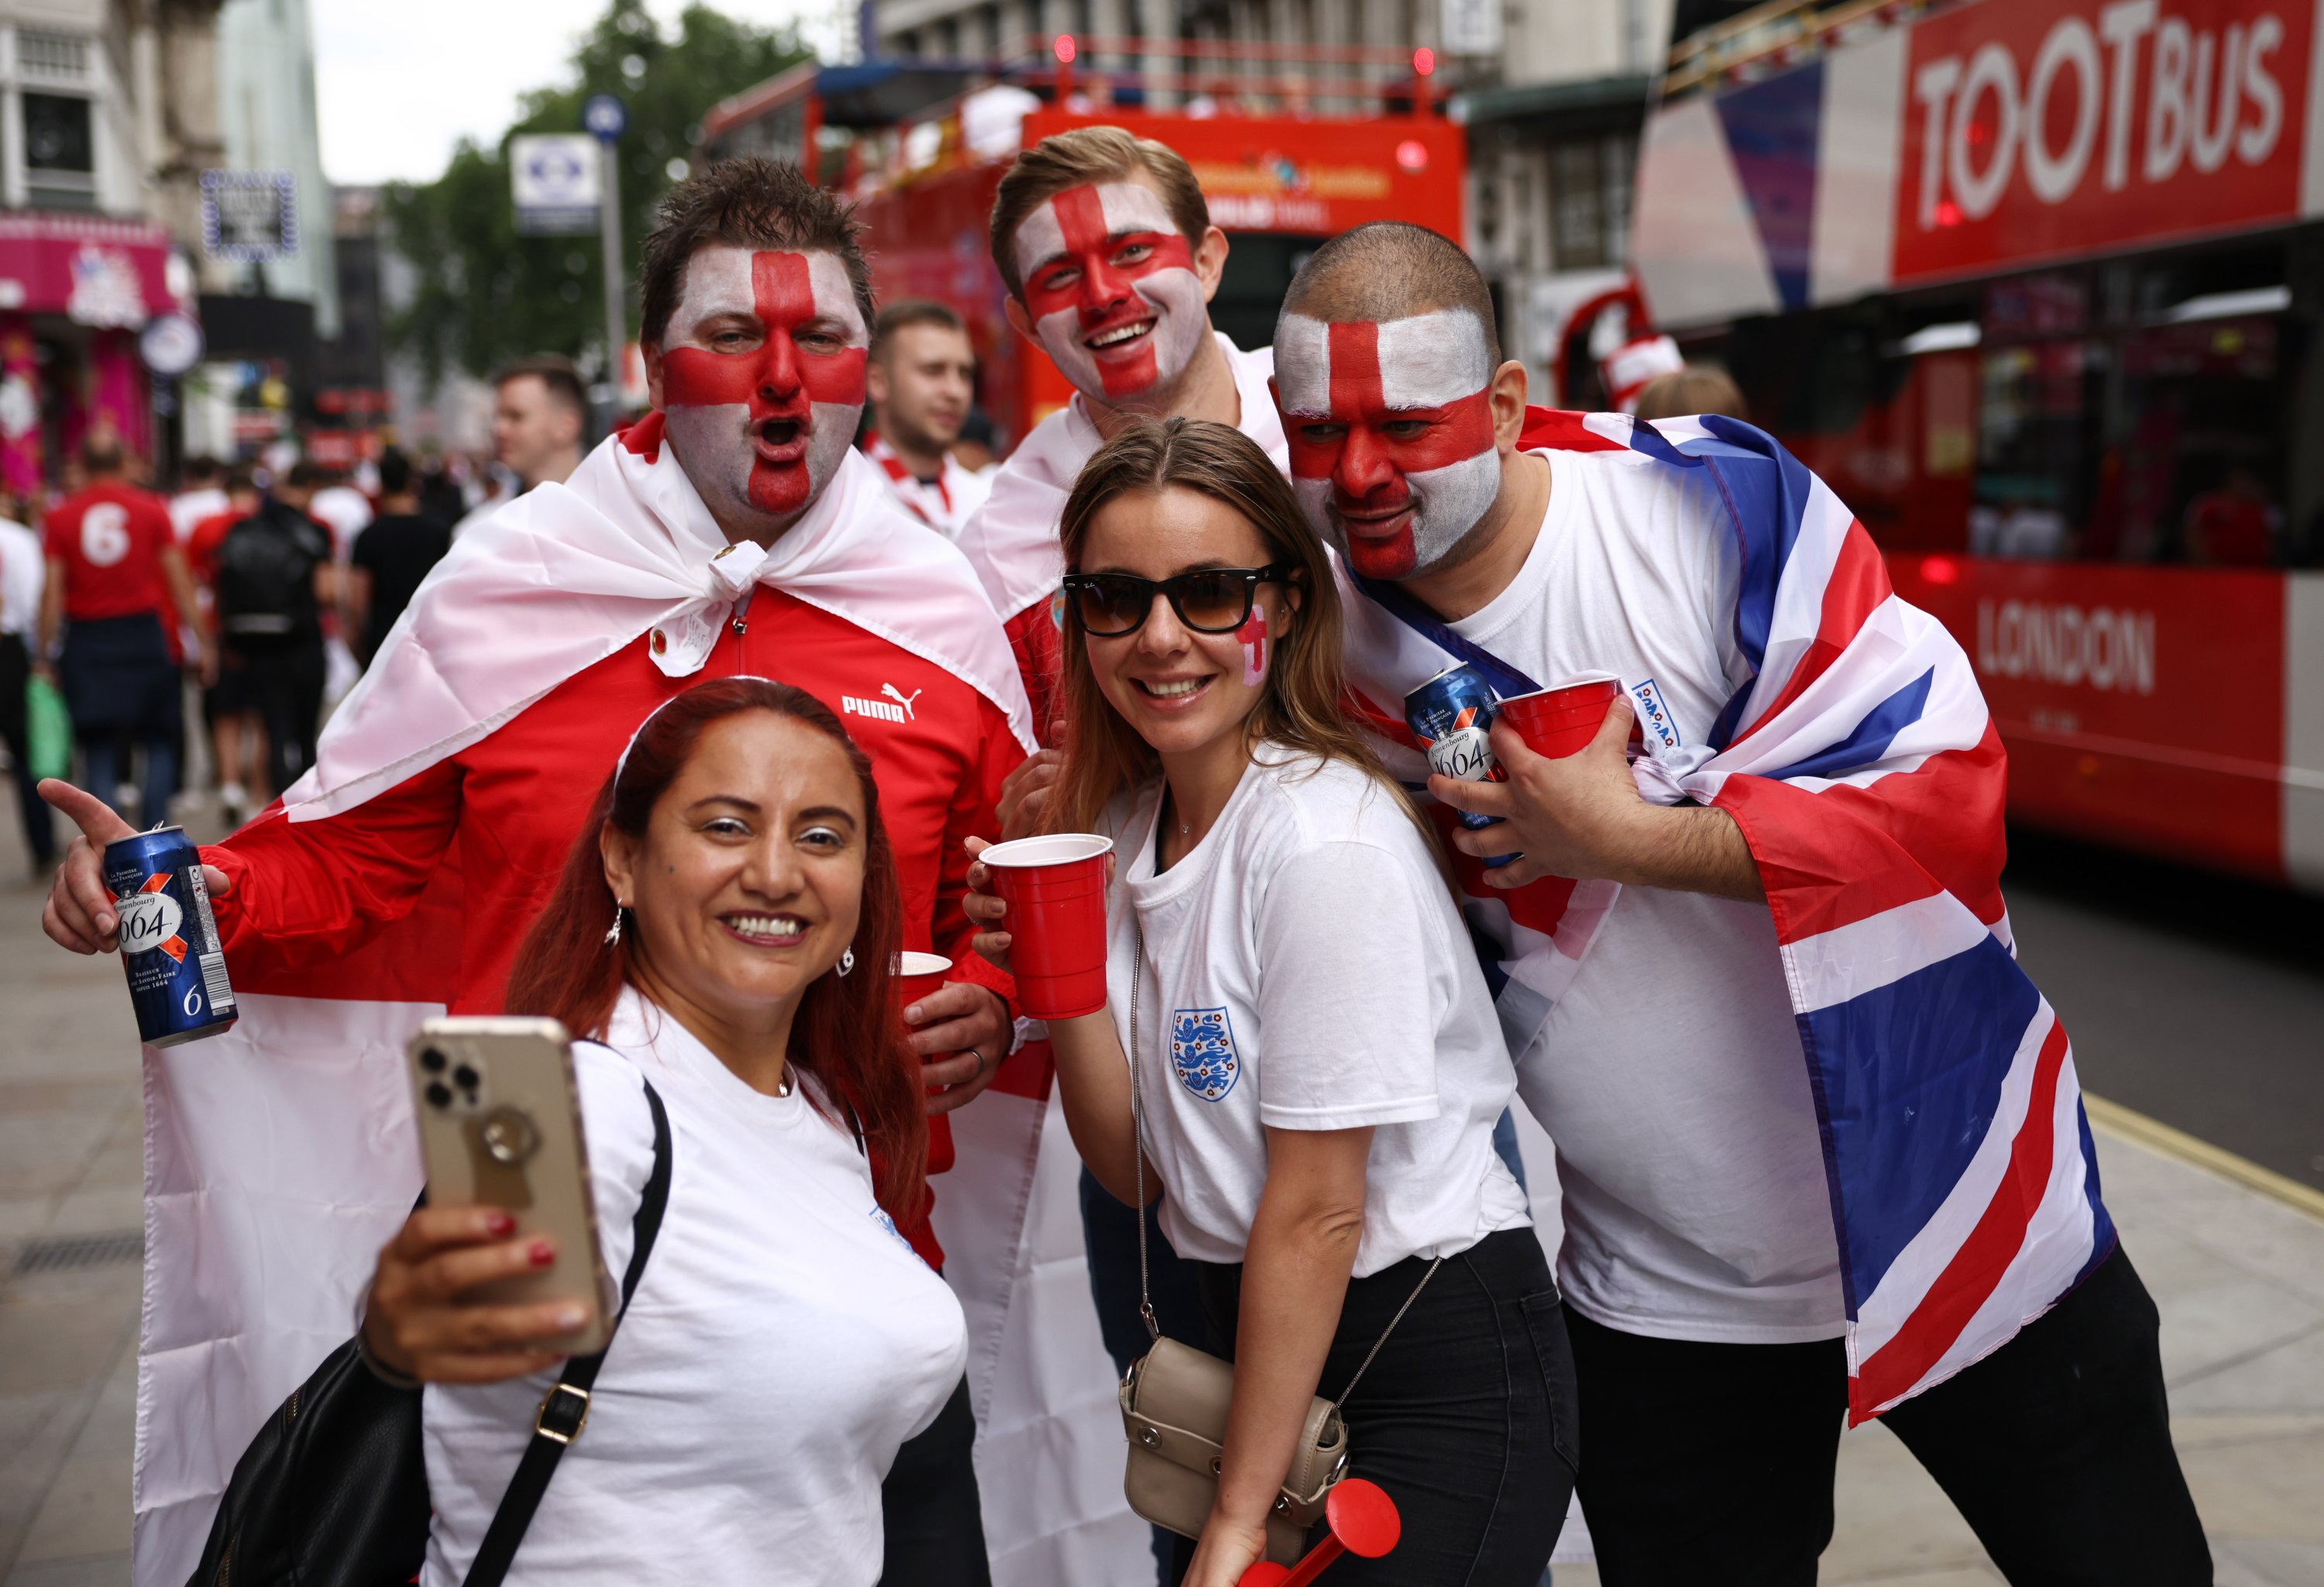 England fans gather at Leicester Square ahead of the Euro 2020 final between England and Italy, London, England, July 11, 2021. (Reuters Photo)